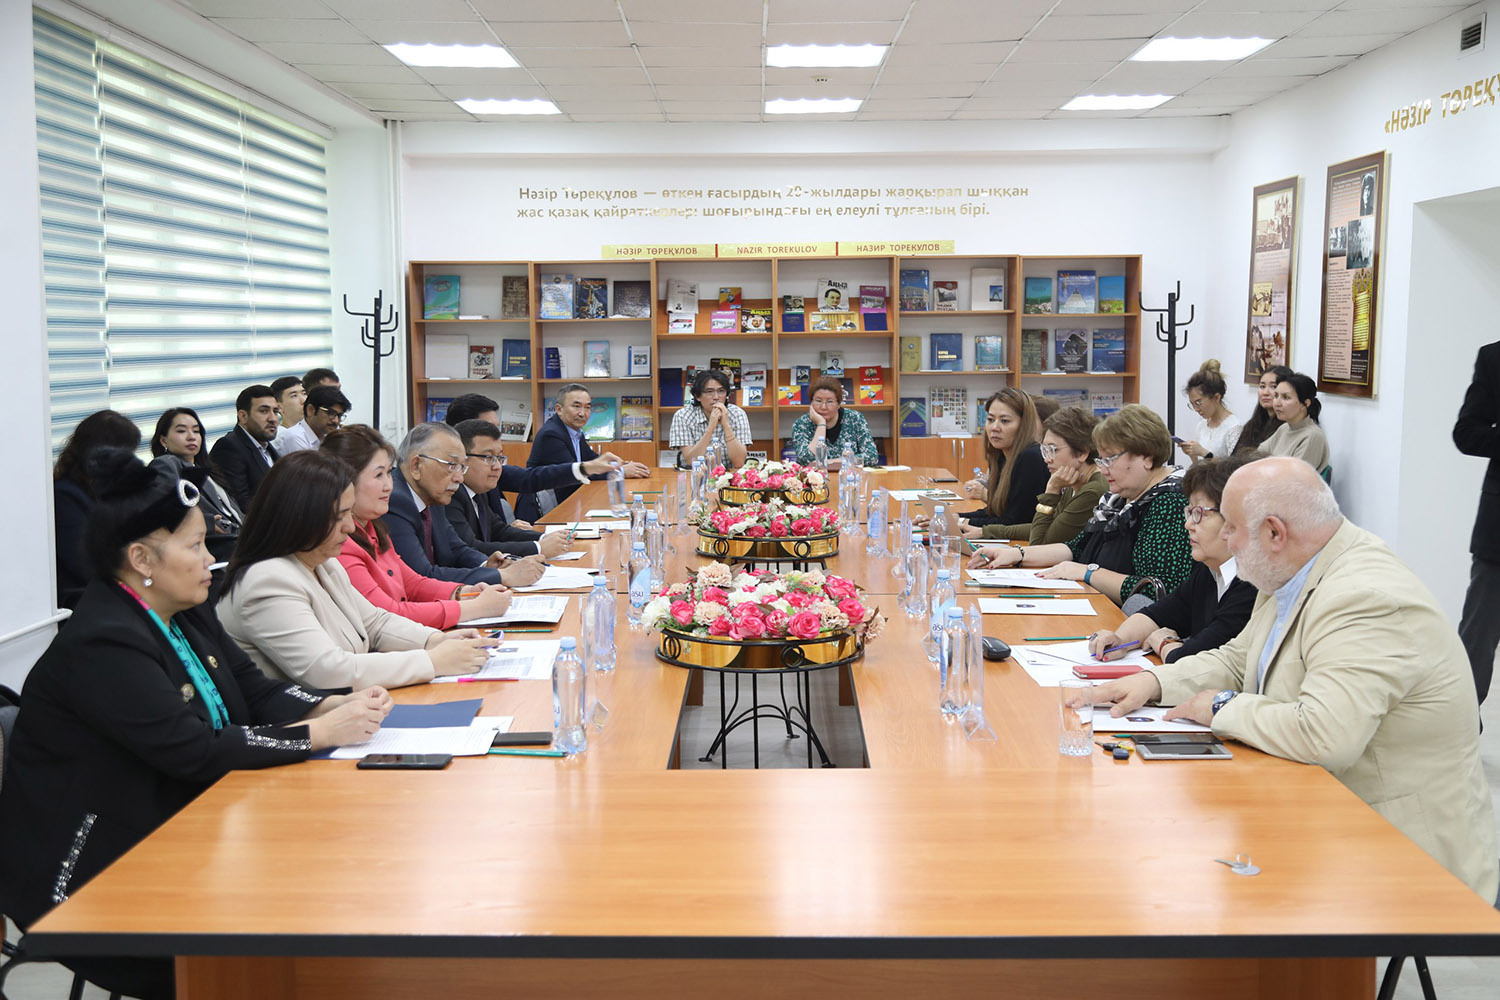 Experts exchanged views on the foreign policy of the Republic of Kazakhstan